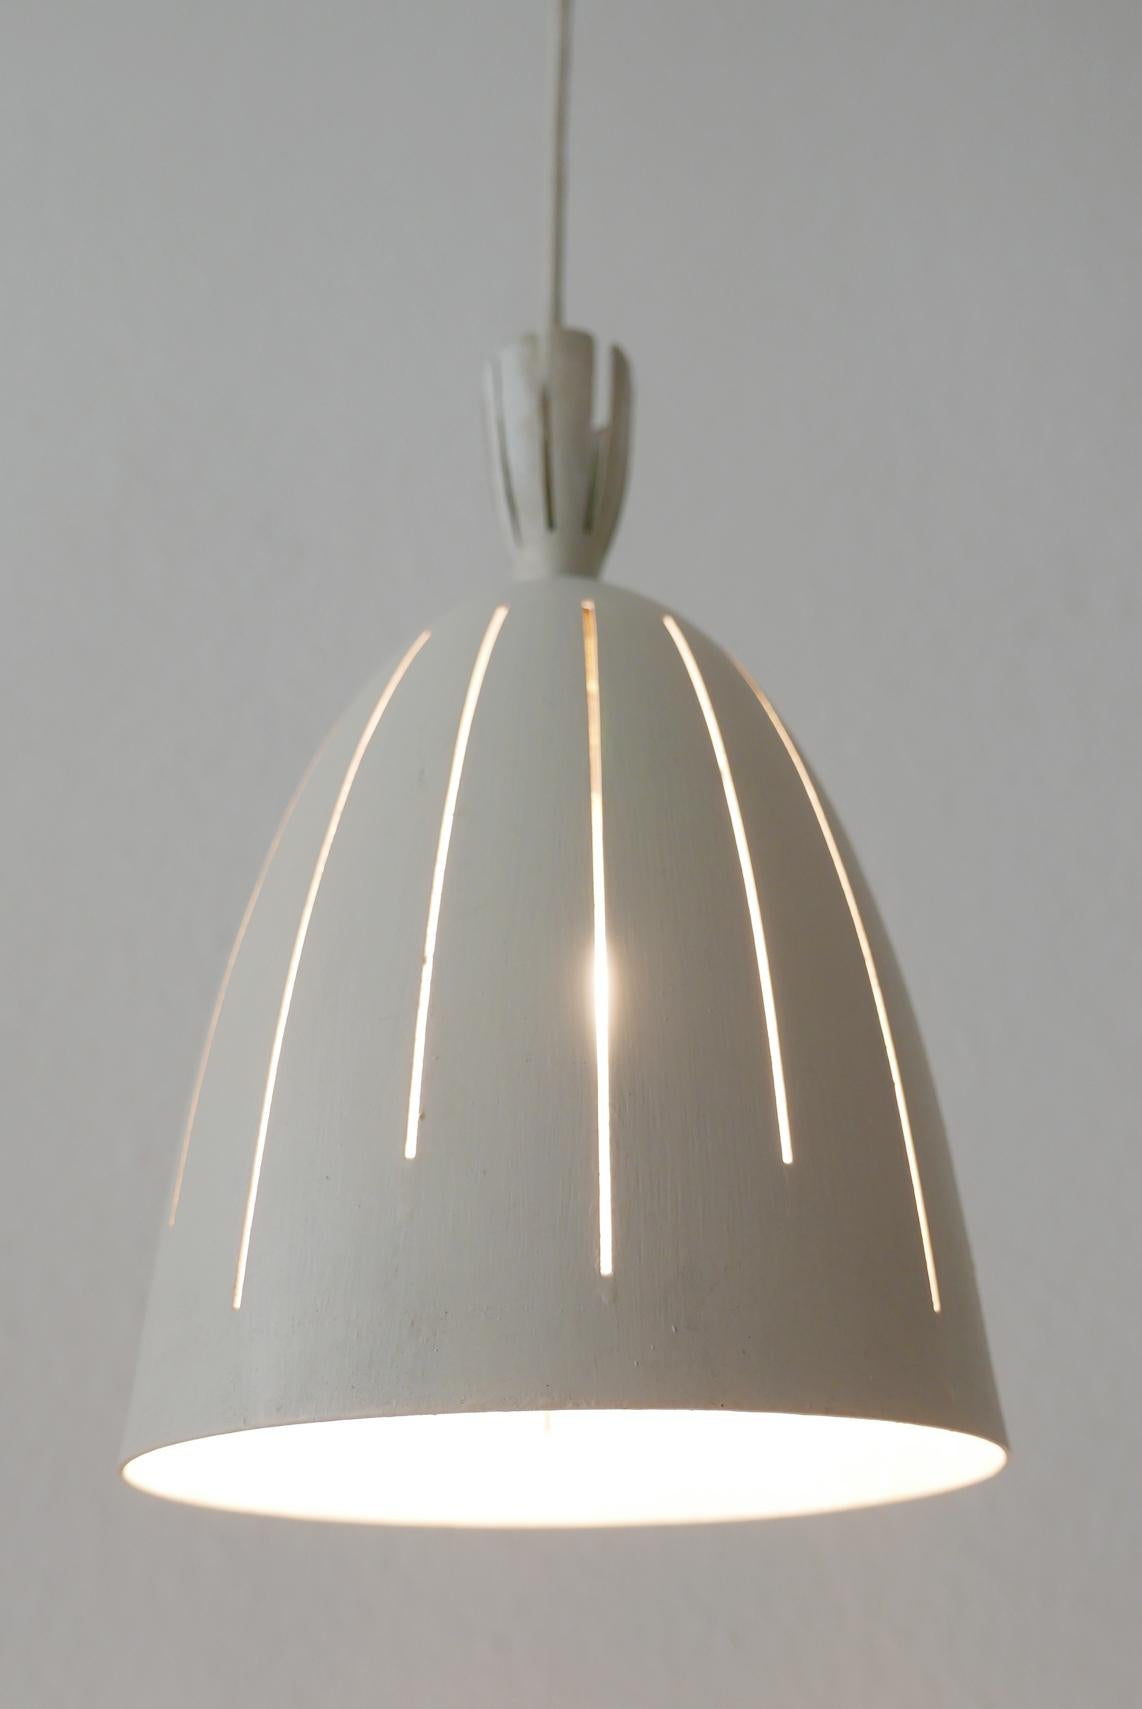 Set of Three Lovely Mid-Century Modern Diabolo Pendant Lamps, 1950s, Germany For Sale 9